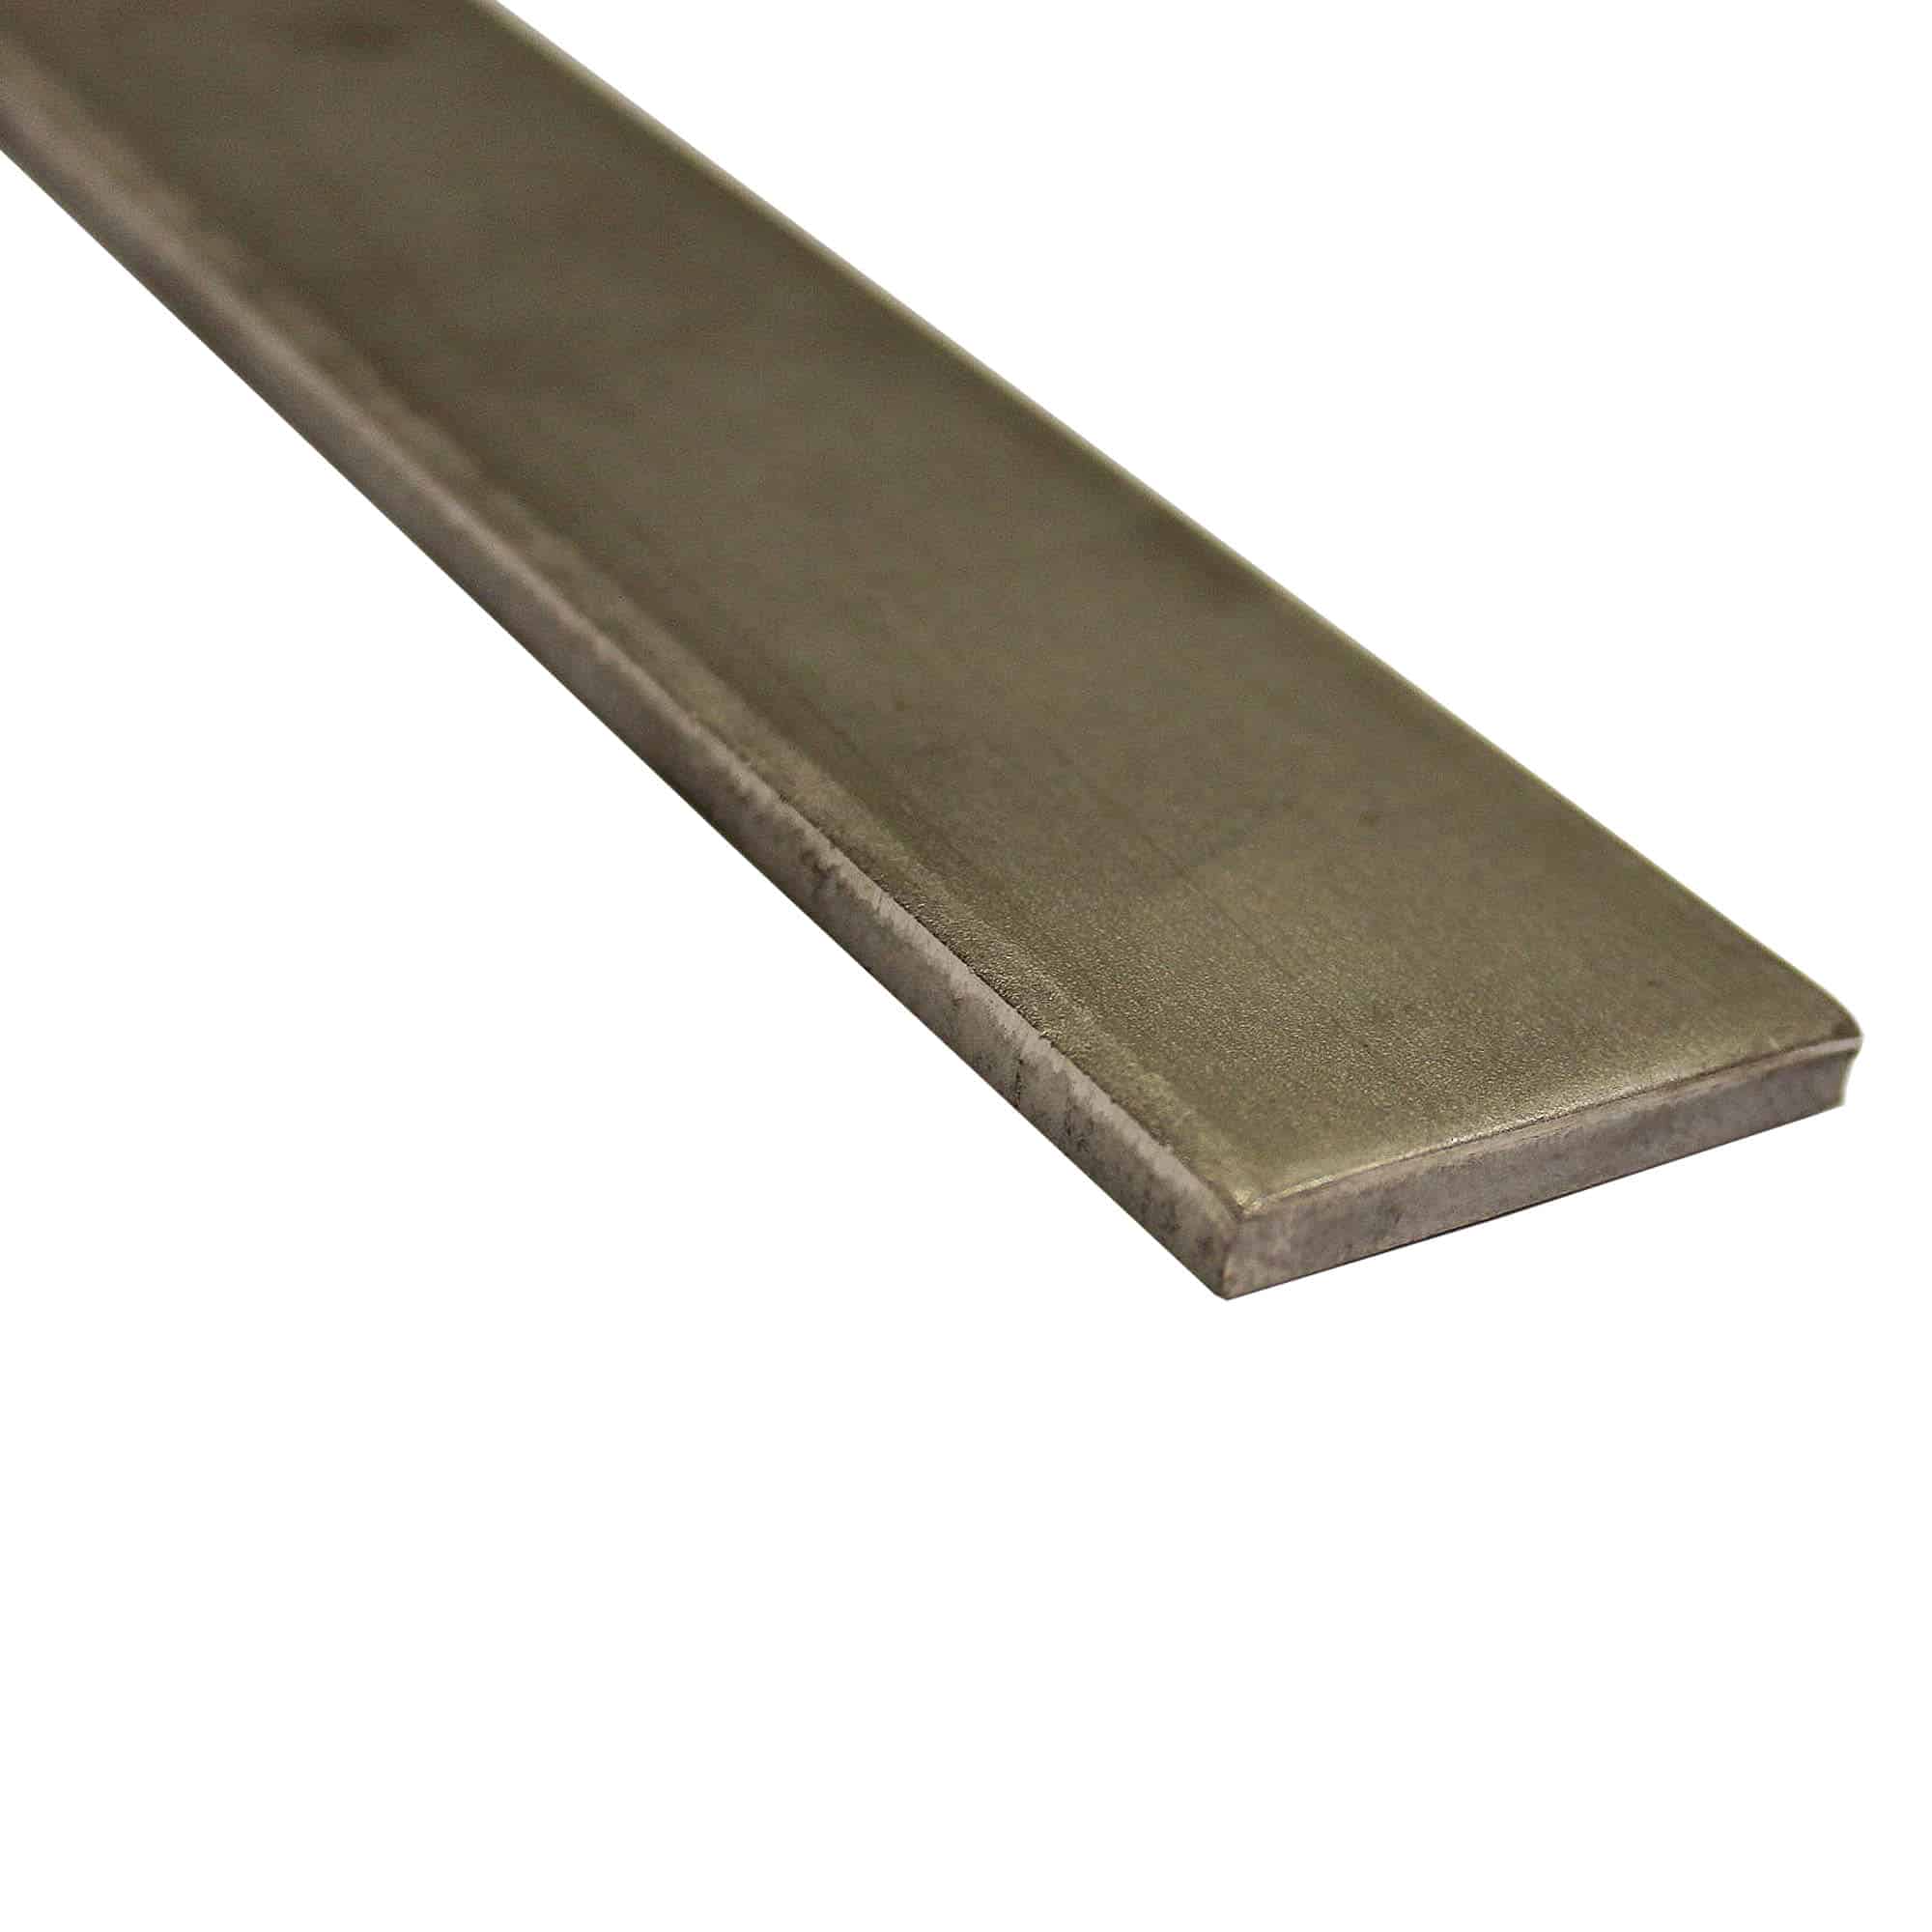 Stainless Steel 304 Grade Flat Bar 6mm Thick x 40mm Width strips of metal